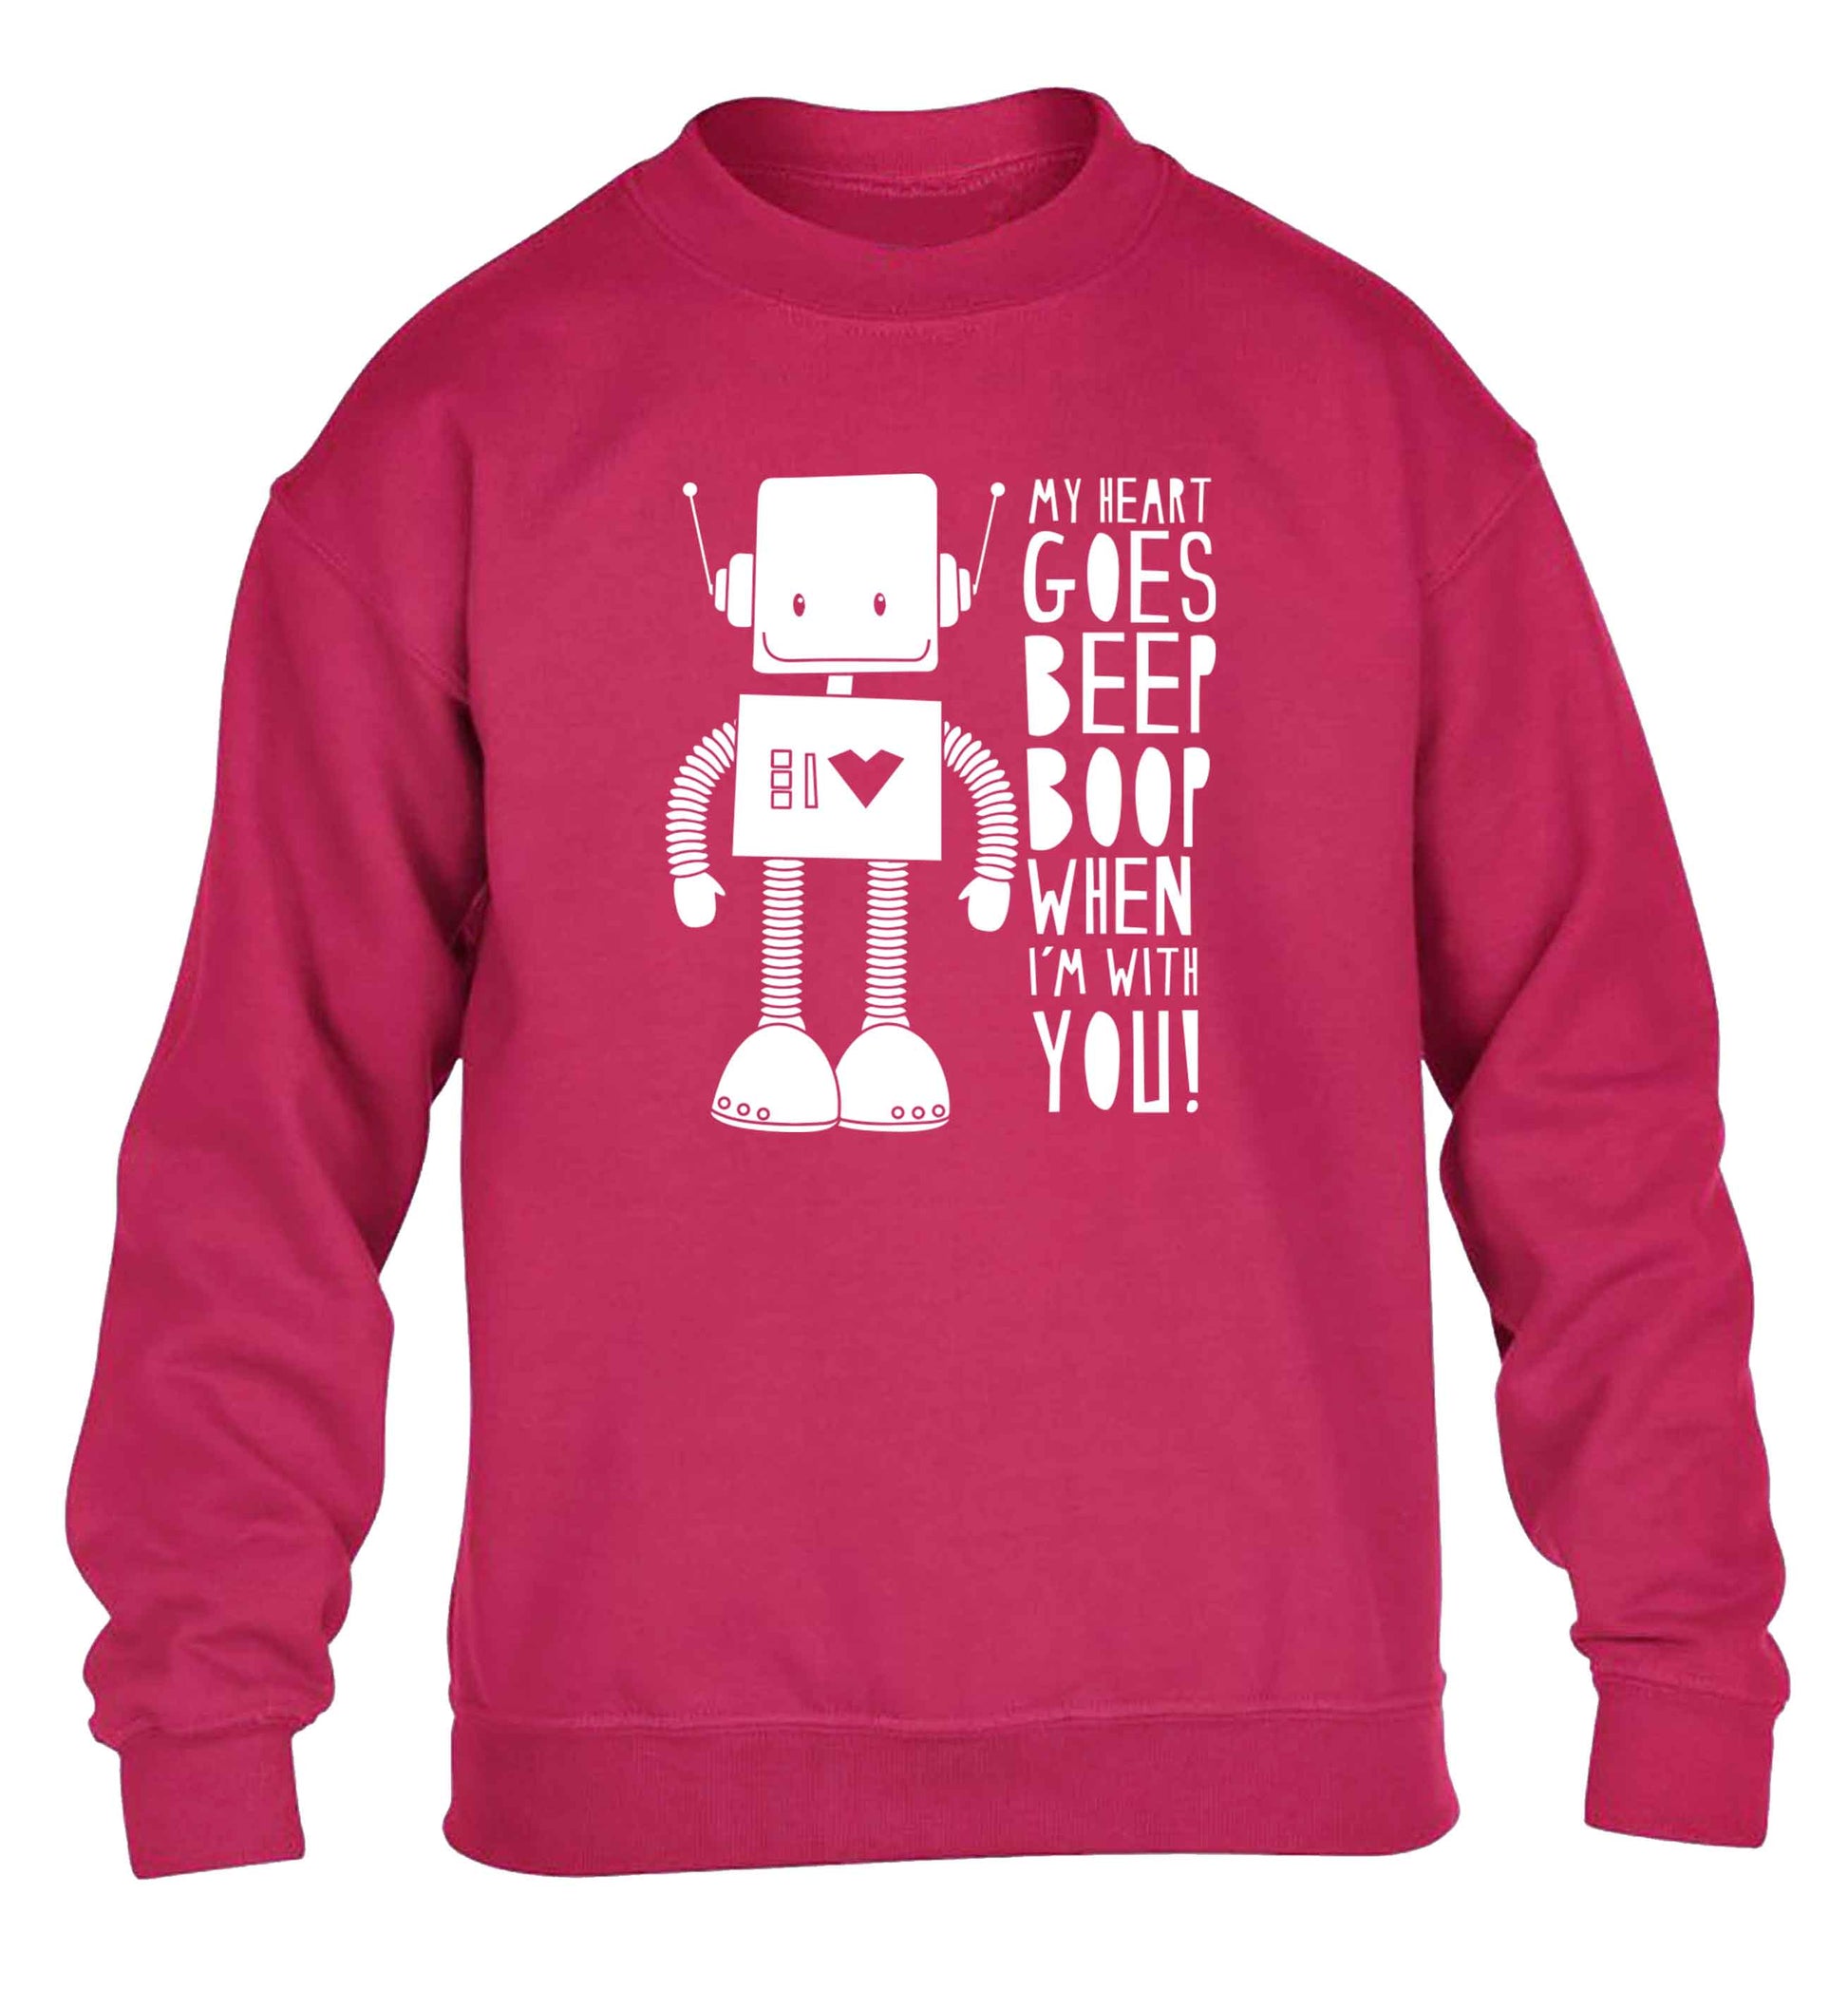 My heart goes beep boop when I'm with you children's pink sweater 12-13 Years